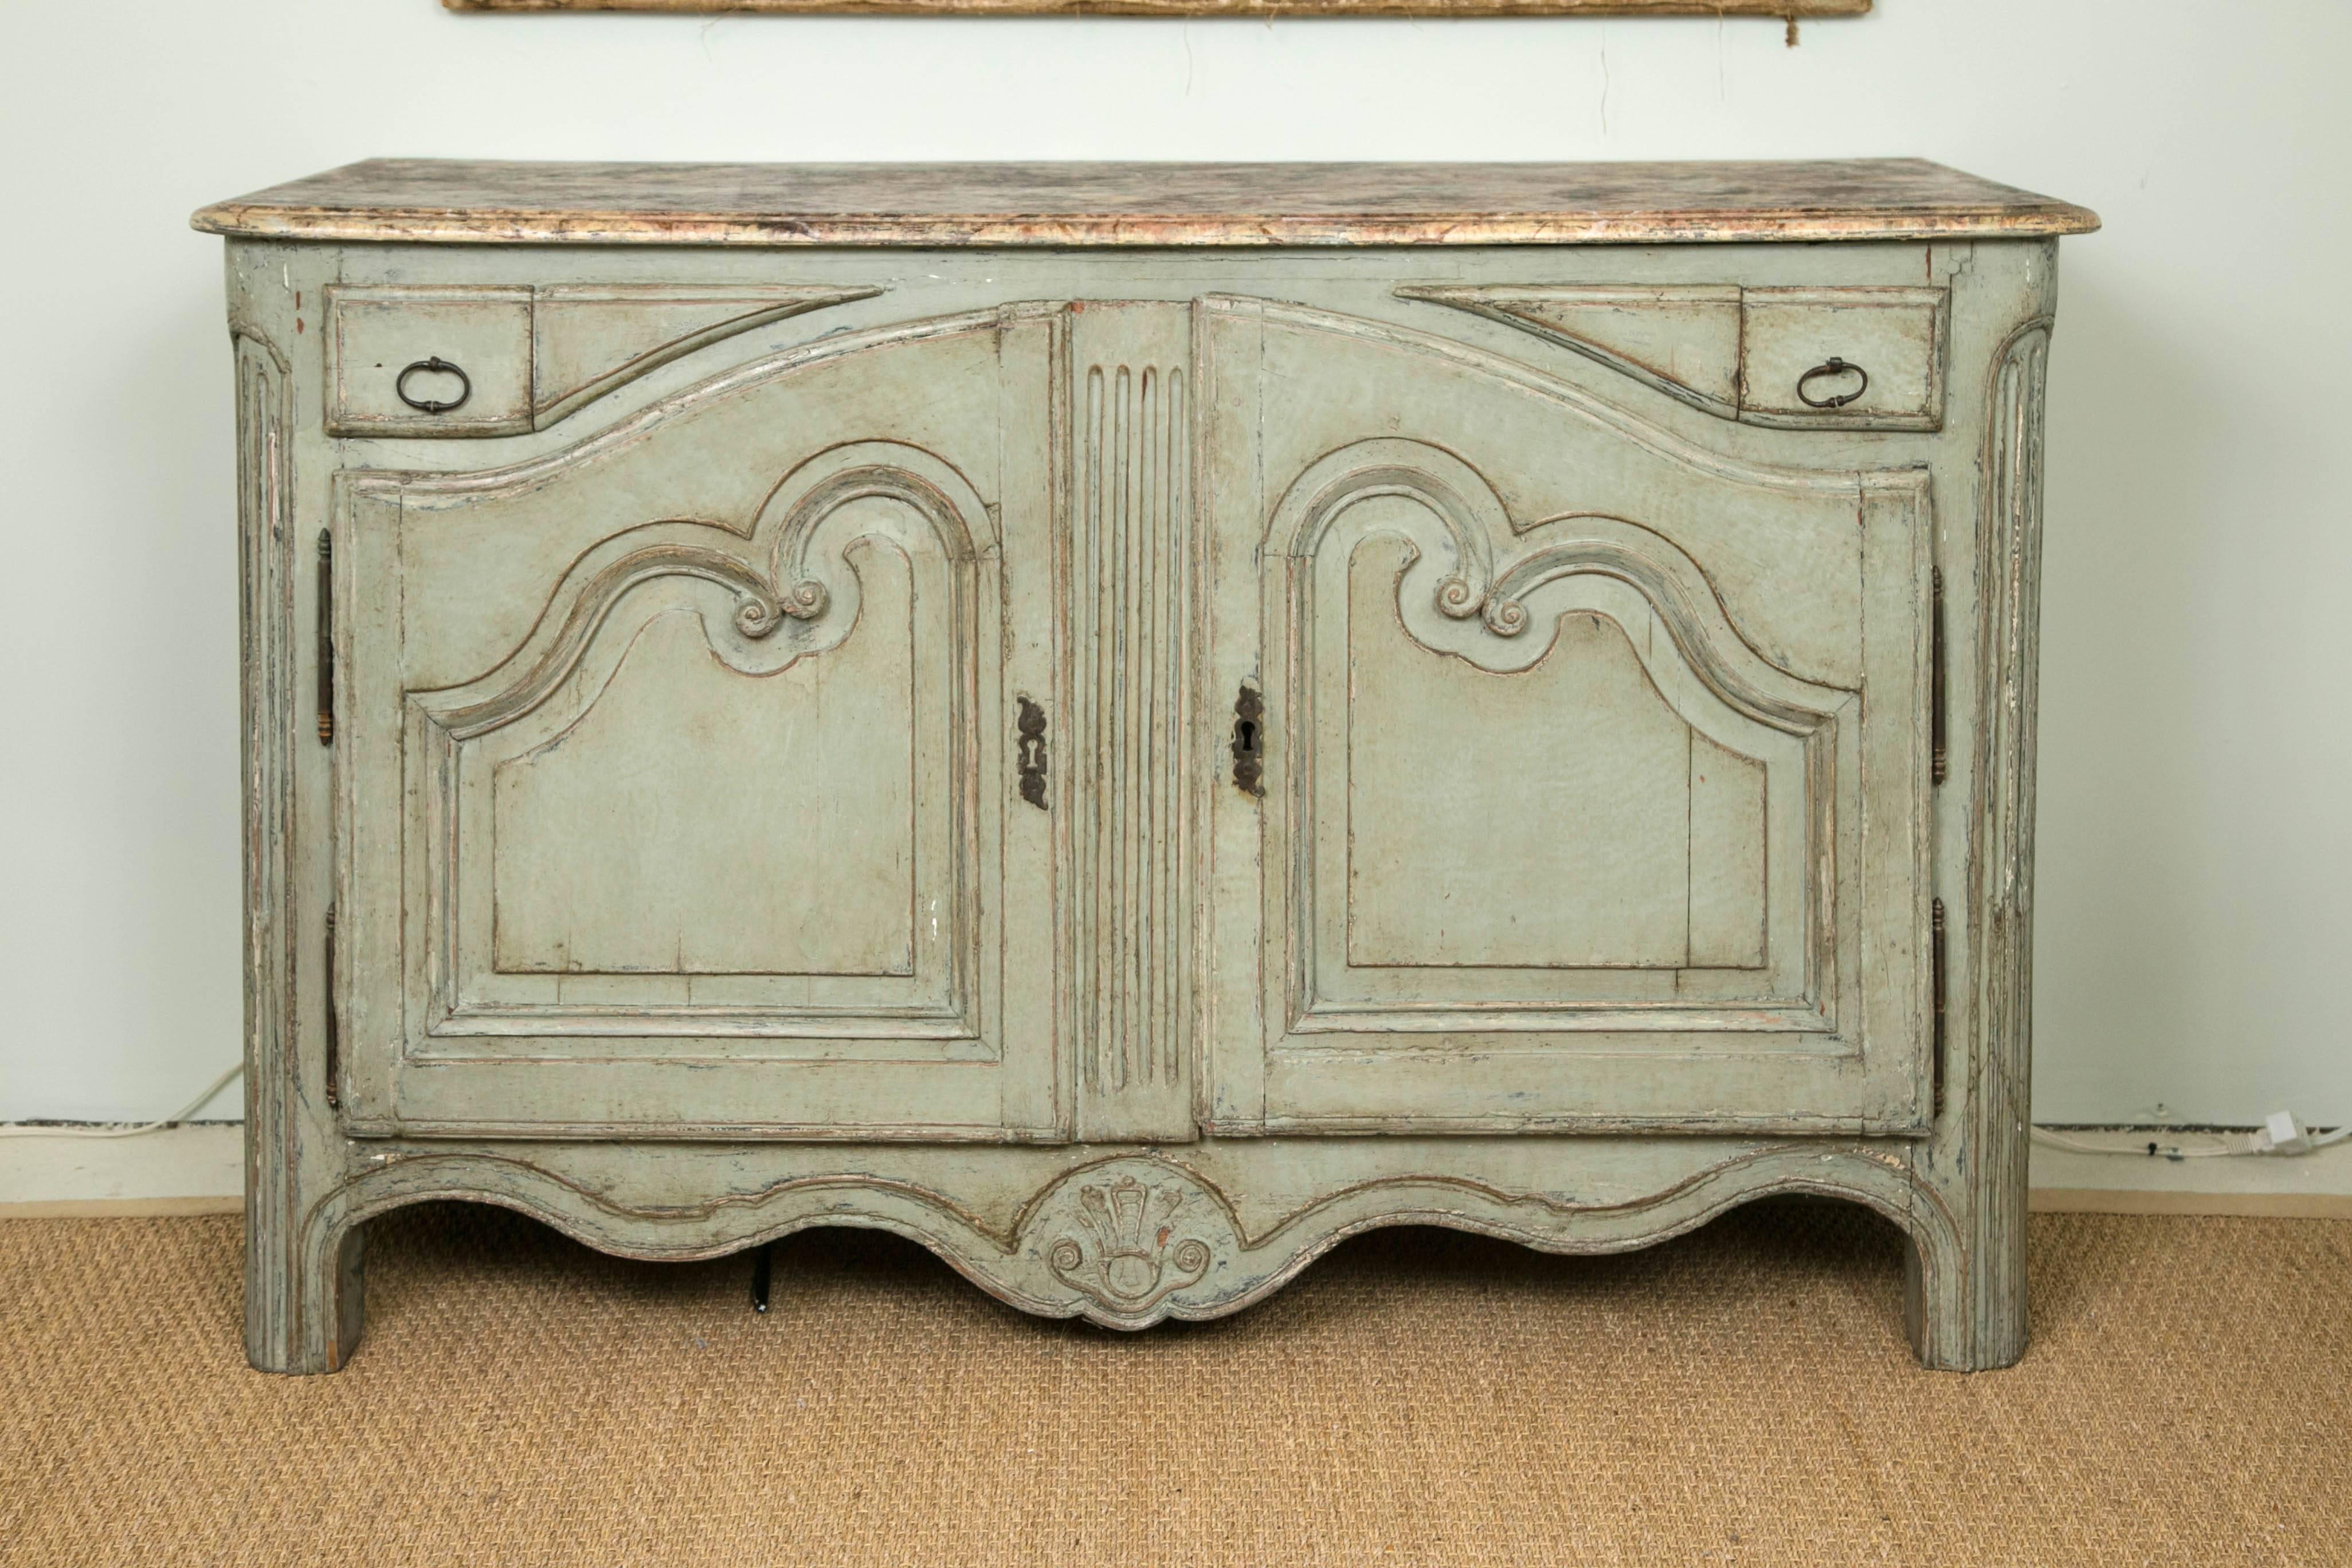 18th century French painted buffet with faux marble top.